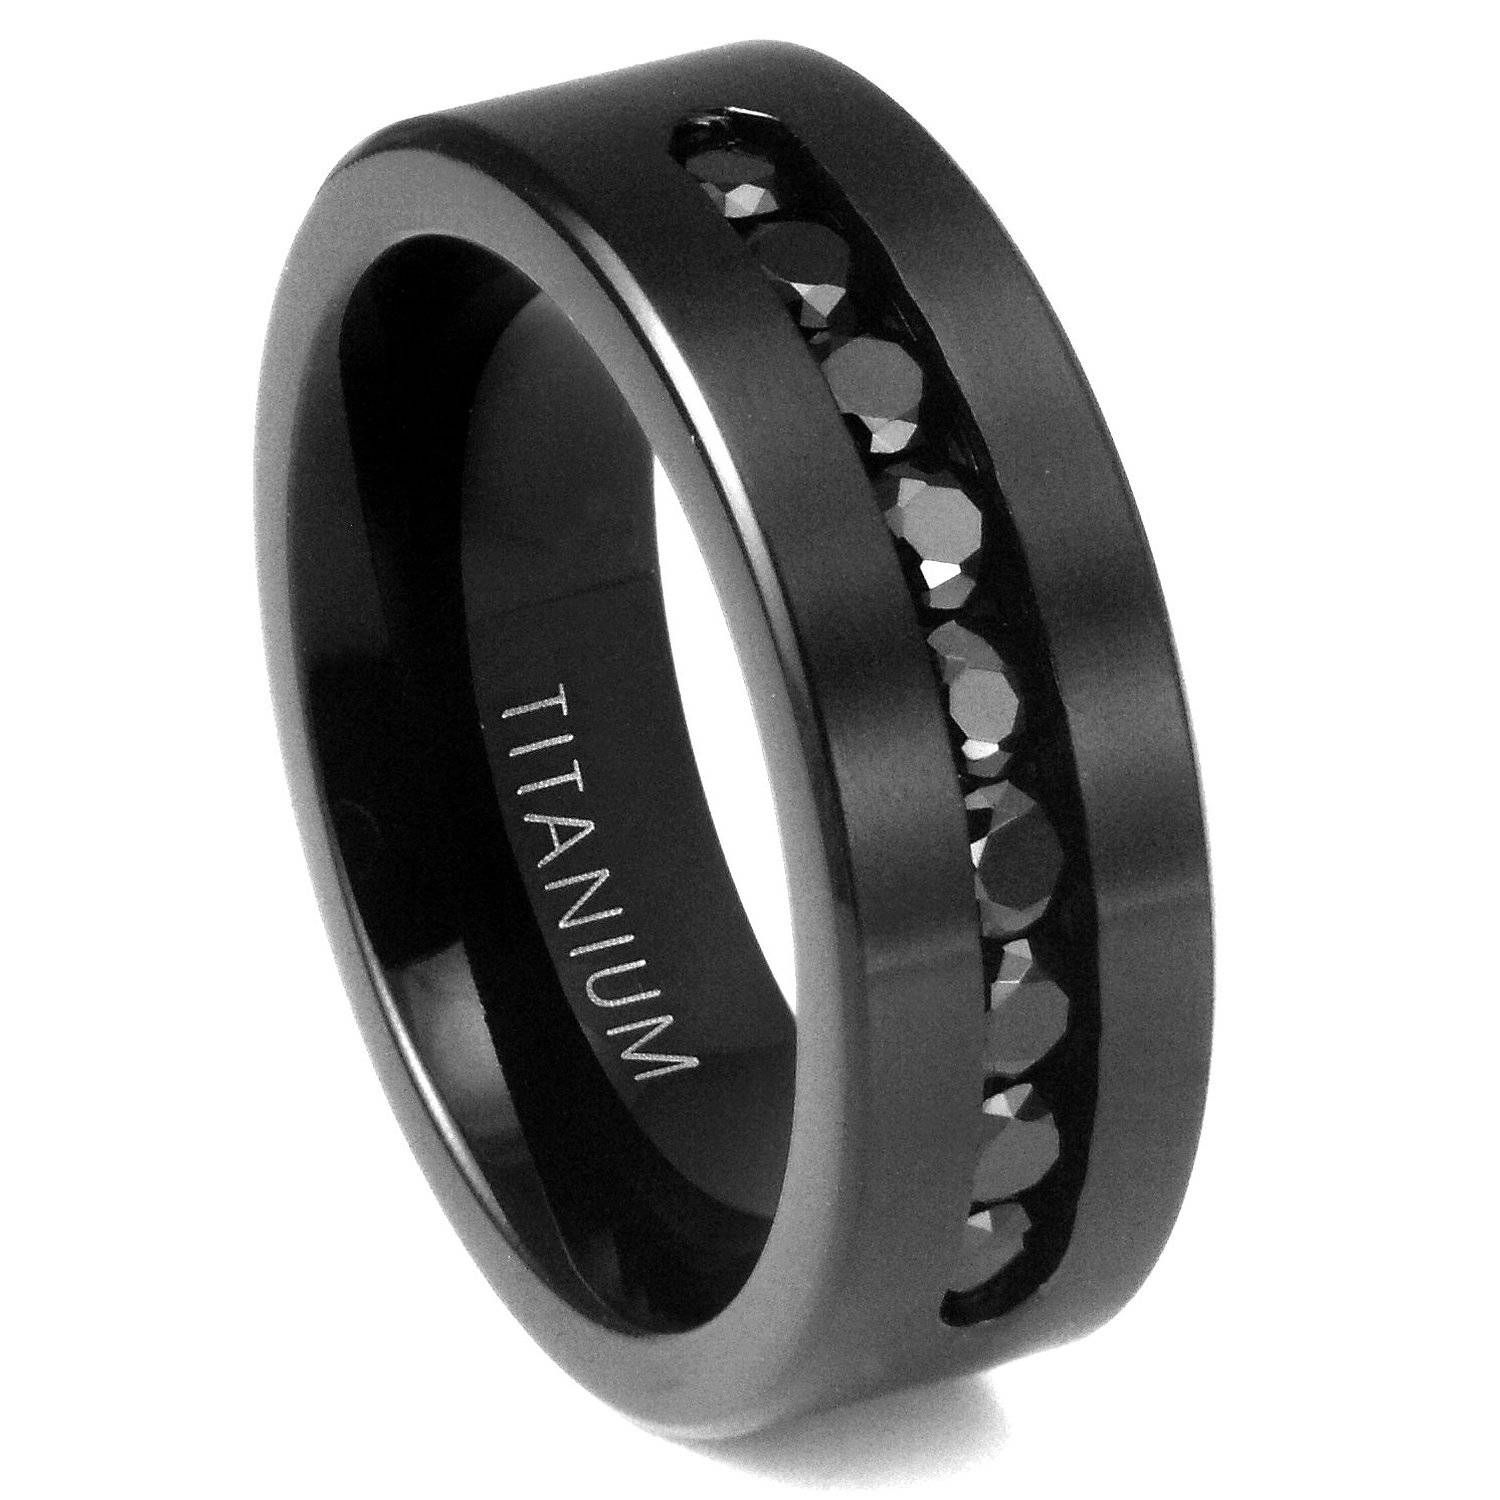 Tips On How To Choose Men Black Wedding Bands | Wedding Ideas Regarding Black Titanium Wedding Bands For Men (View 3 of 15)